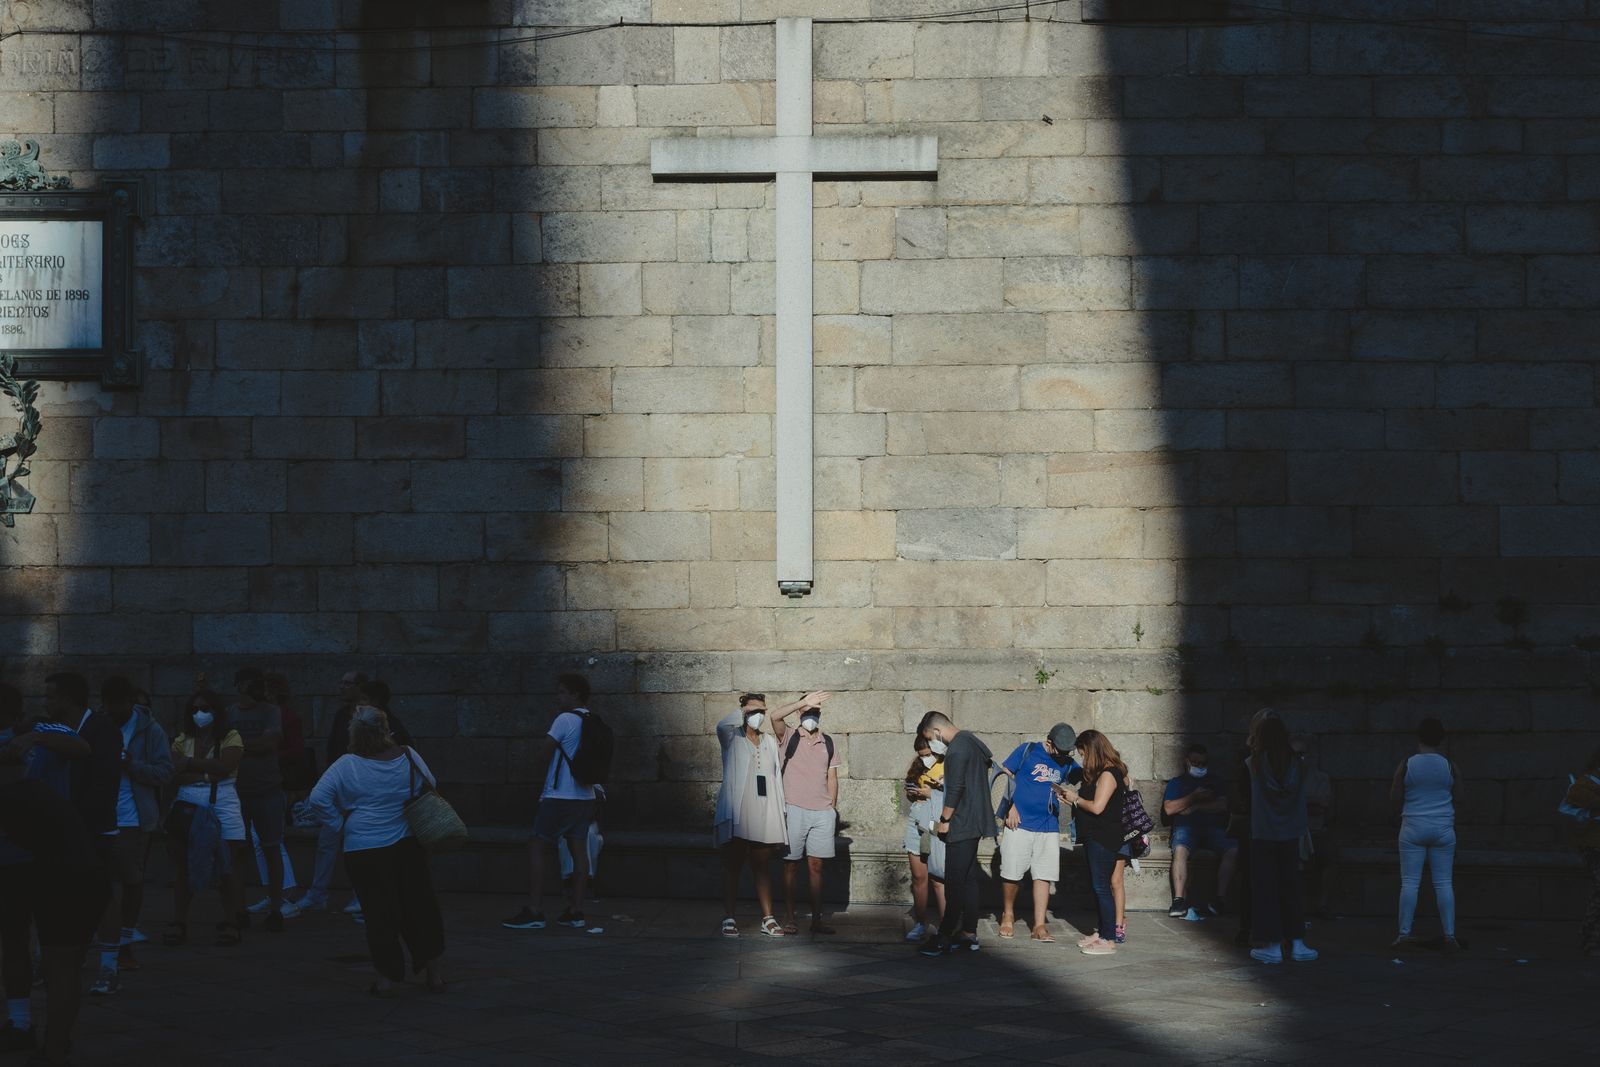 © Ana Norman Bermudez - Tourists and pilgrims line up to see the Santiago de Compostela Cathedral.